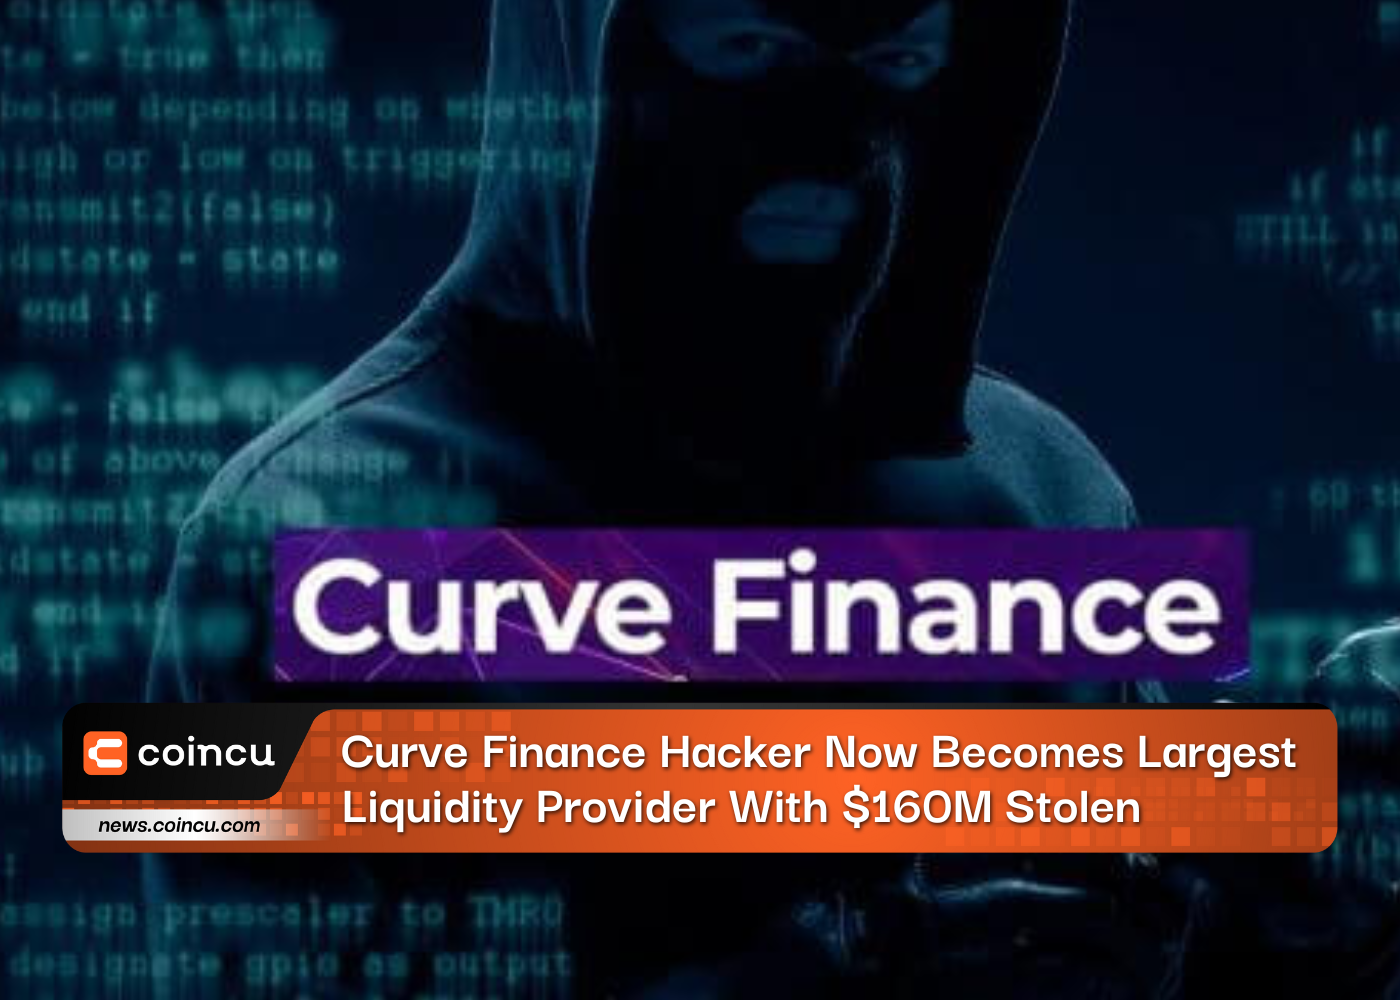 Curve Finance Hacker Now Becomes Largest Liquidity Provider With $160M Stolen